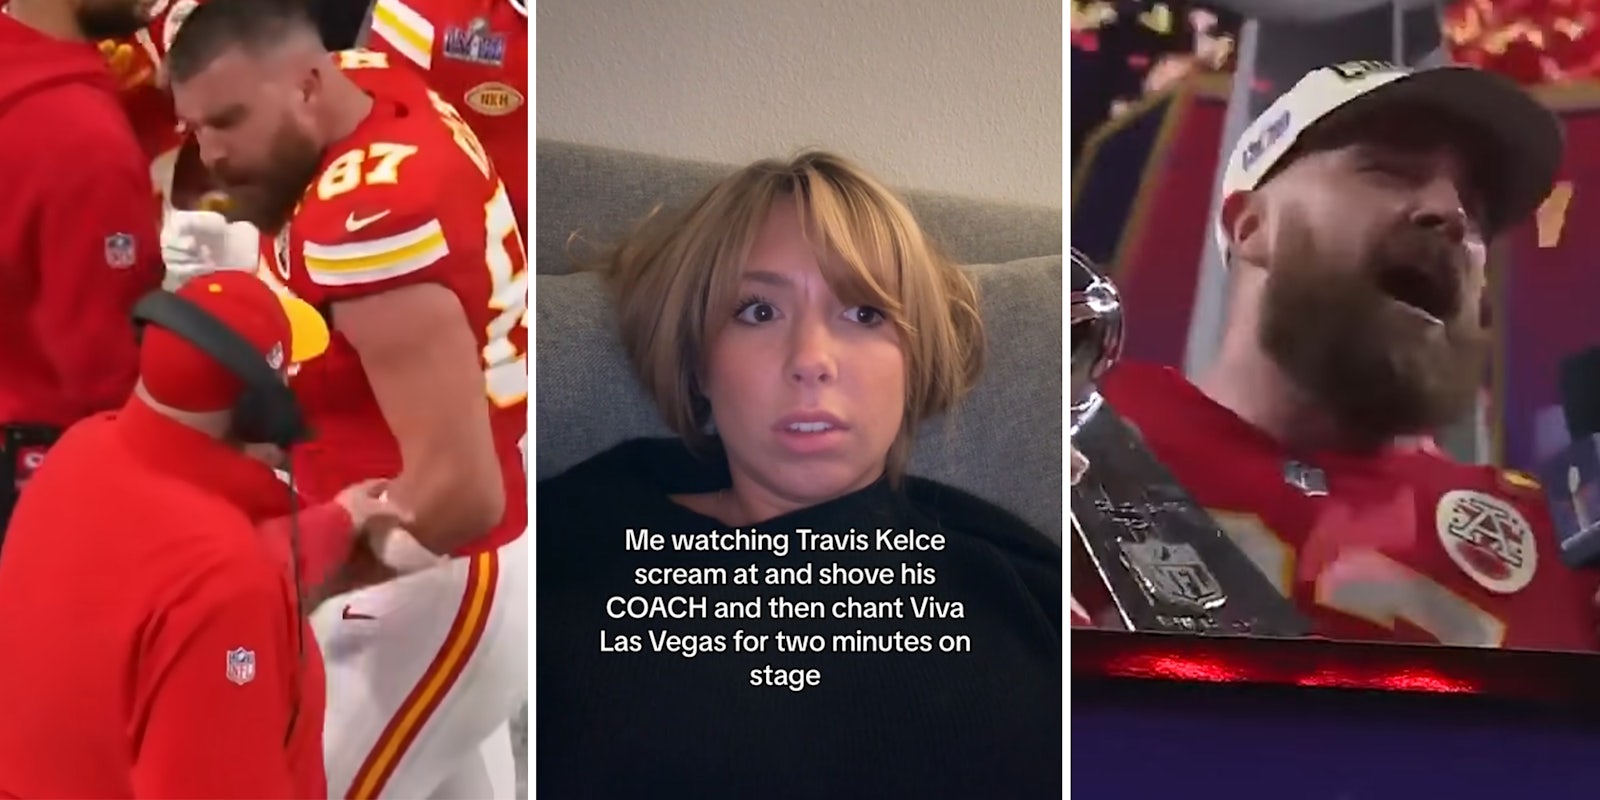 Taylor Swift fans think she got the ick during Travis Kelce’s postgame singing